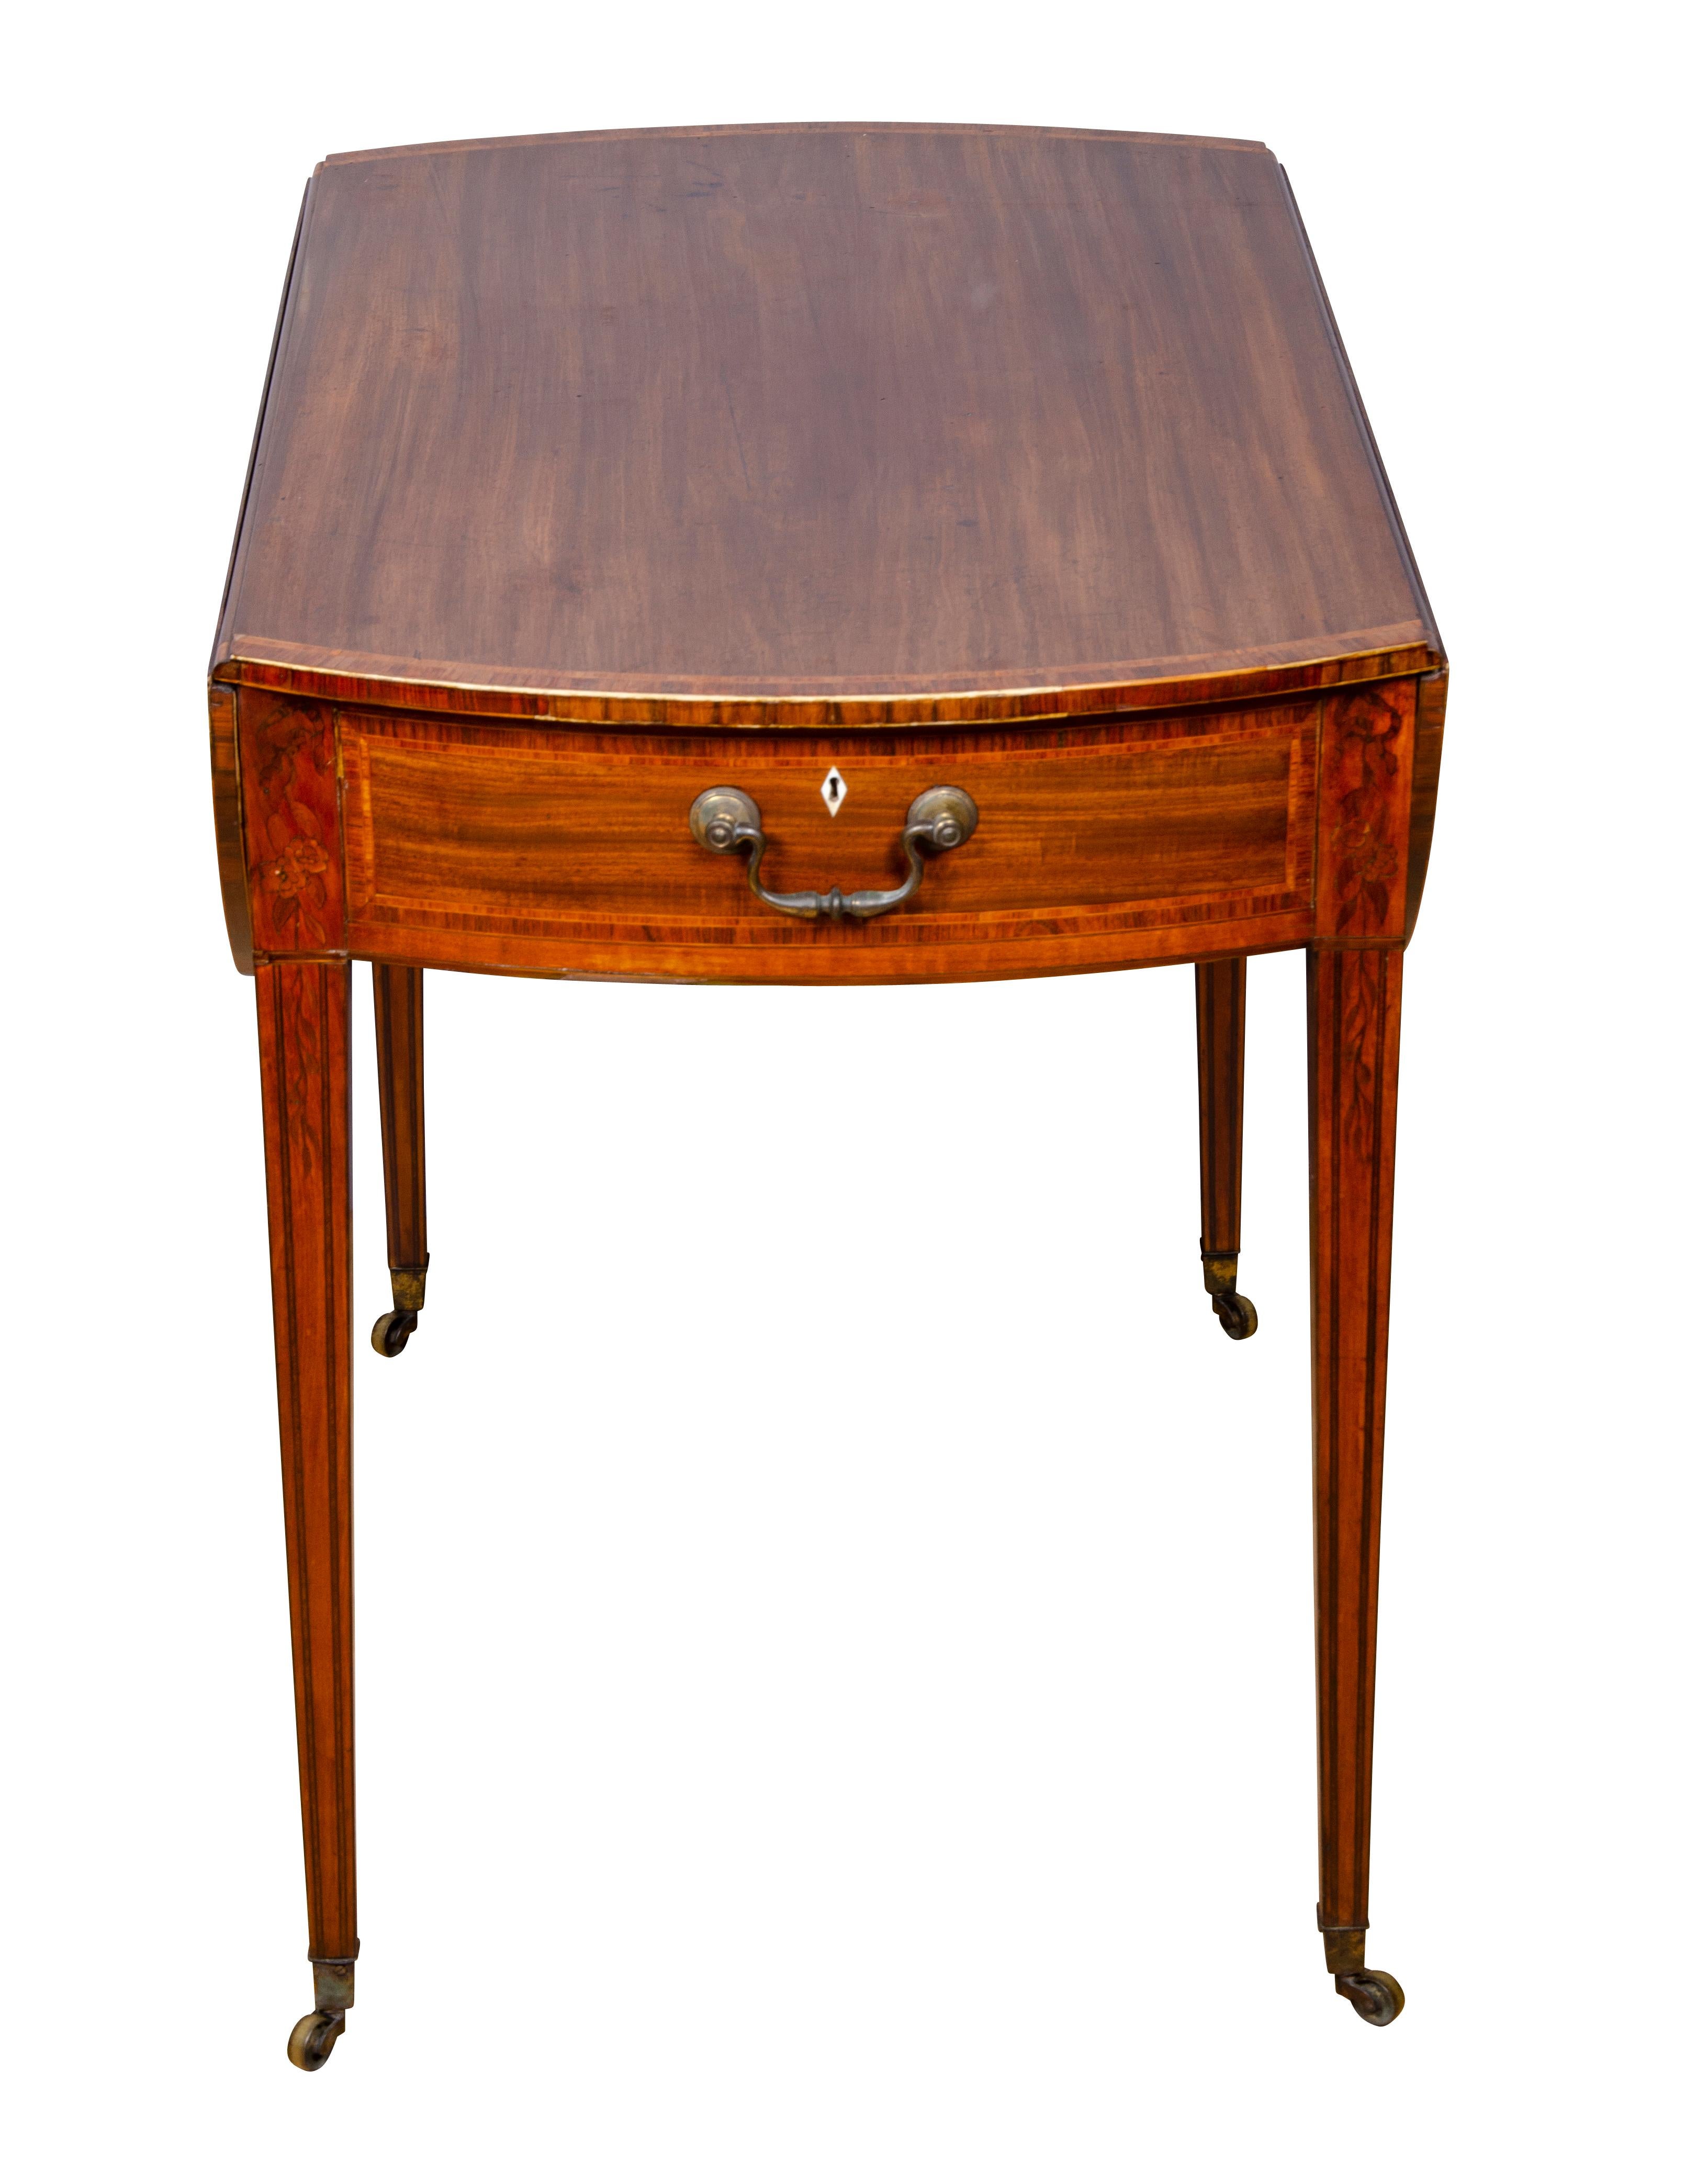 Fine quality example, rectangular form with D- shaped drop leaves, frieze drawer with handle, raised on square tapered legs. Casters. Floral inlays and string, cross banding throughout.